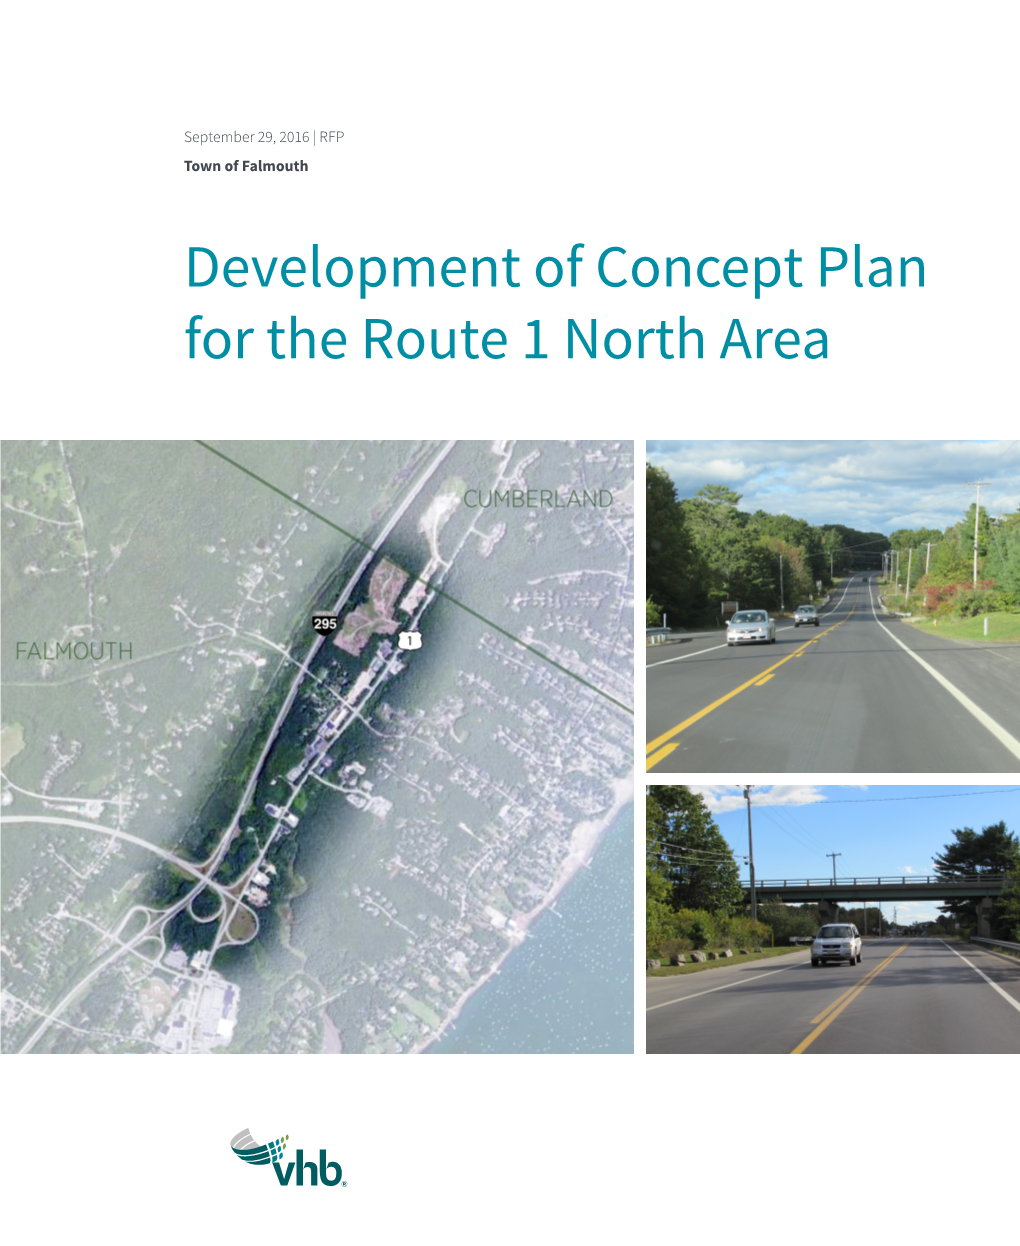 Development of Concept Plan for the Route 1 North Area